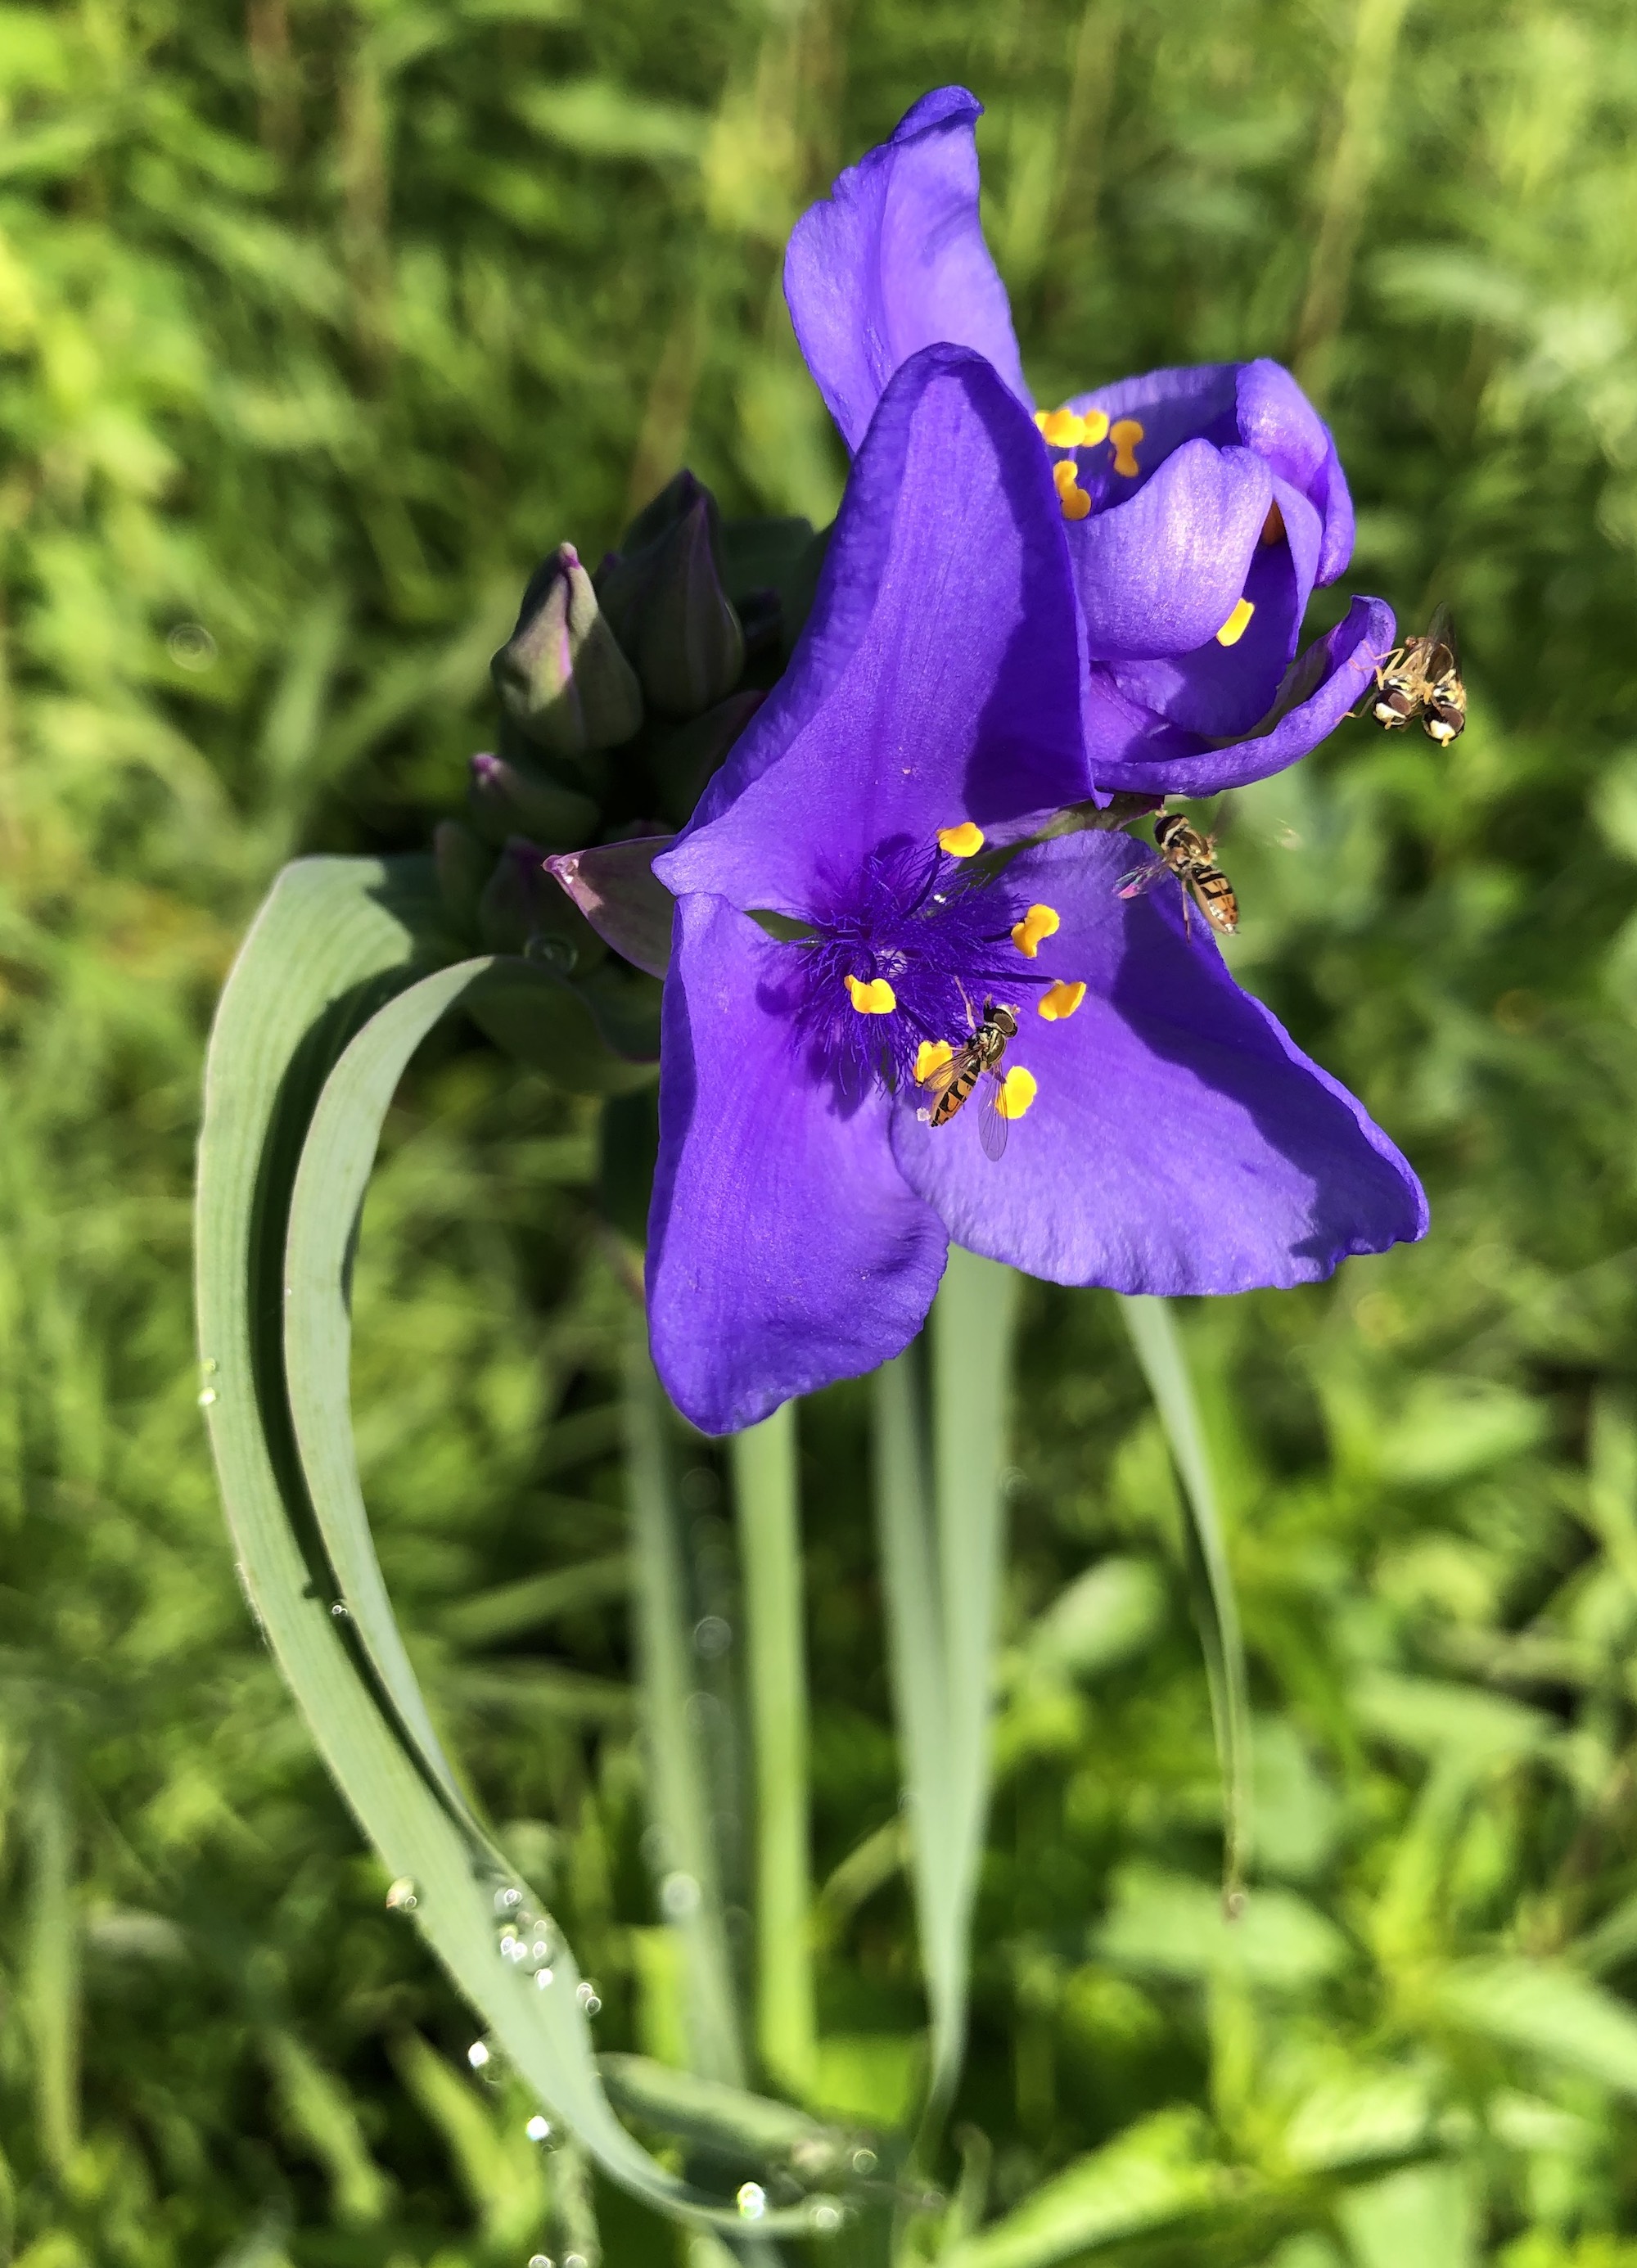 Spiderwort on the banks of the retaining pond on corner of Nakoma Road and Manitou Way on June 5, 2019.